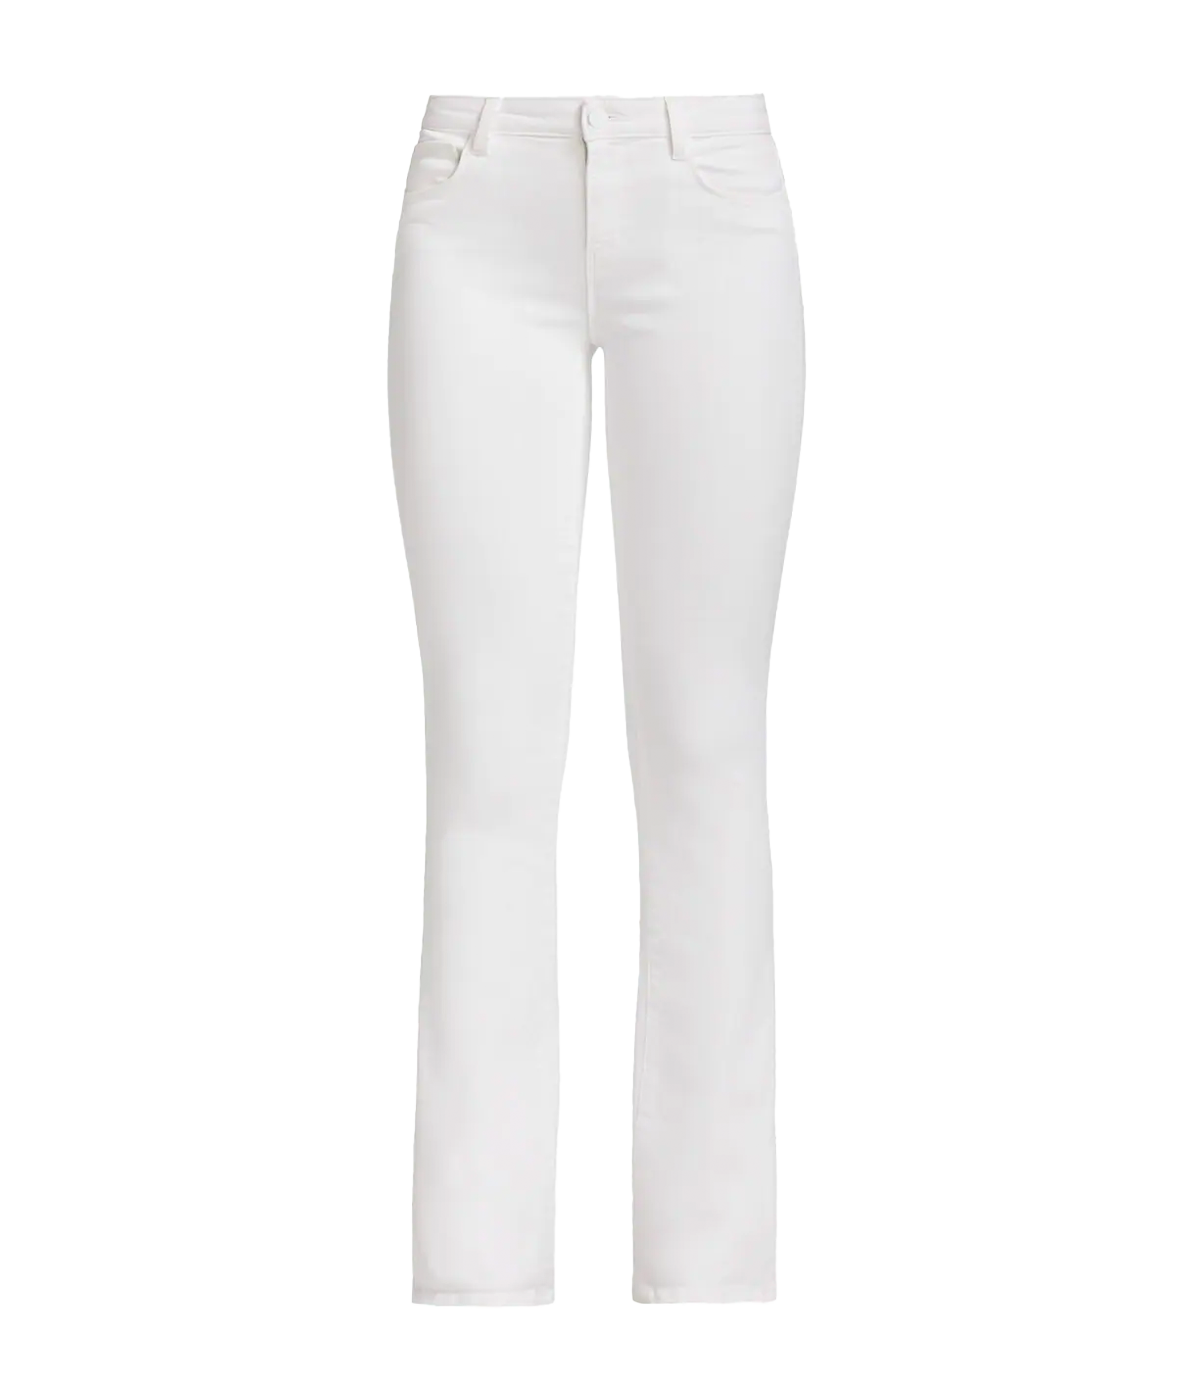 Image of a classic white coated denim skinny jean, with a tapered leg, leather pants, silver hardware, skinny fit. Everyday jean, coated denim, made in USA, date night outfit